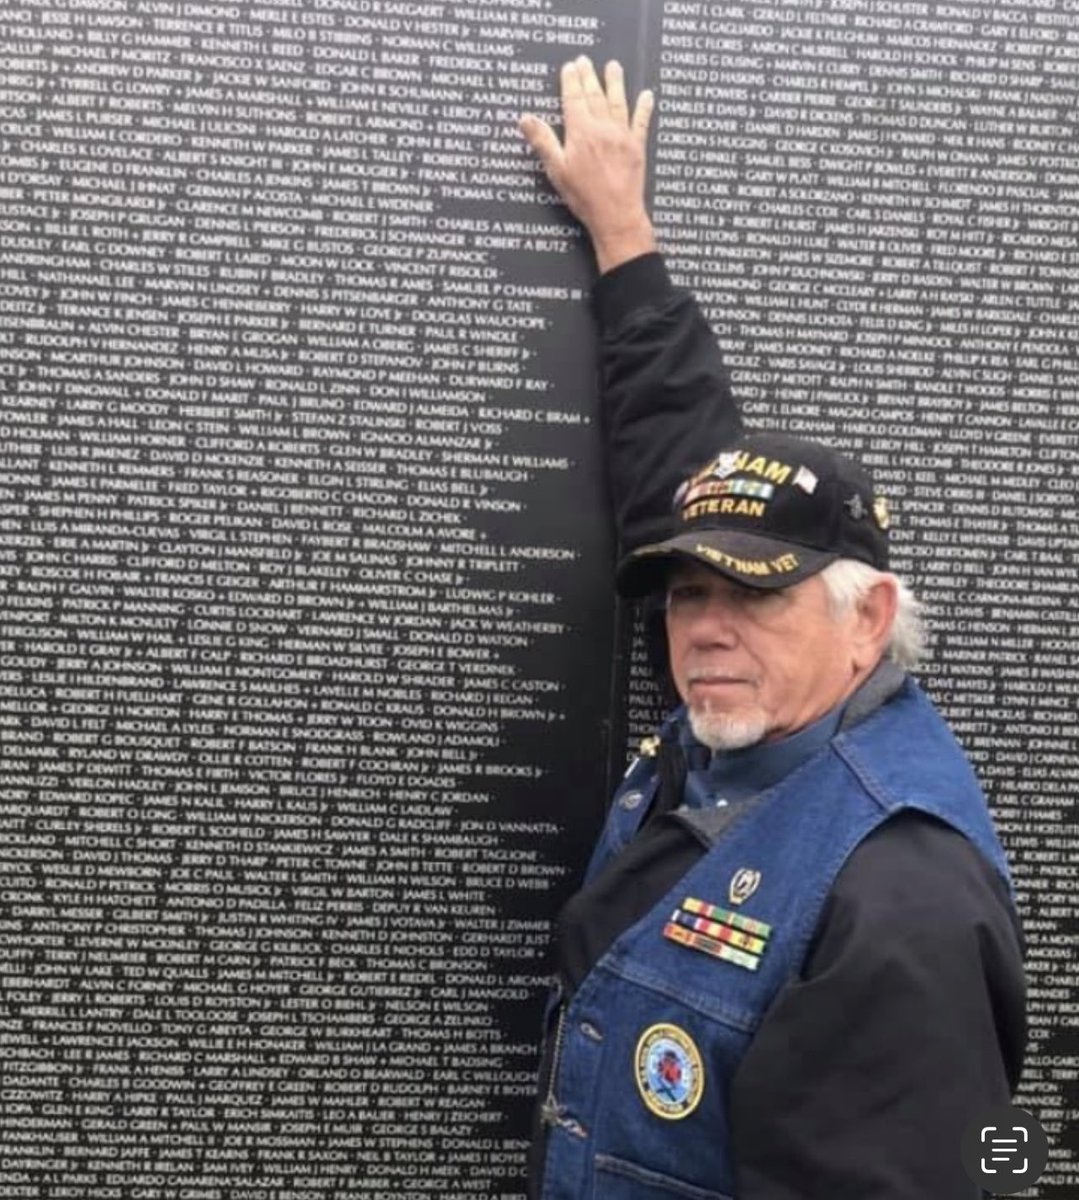 “I’m a VietNam Vet. Someone once said the horrors of Viet Nam I could deal with but the rejection when we came home was the worst horror to deal with. Both of my parents served in WWII so when I volunteered in 1966, I was very proud to serve my country.” - Ken Kohutek